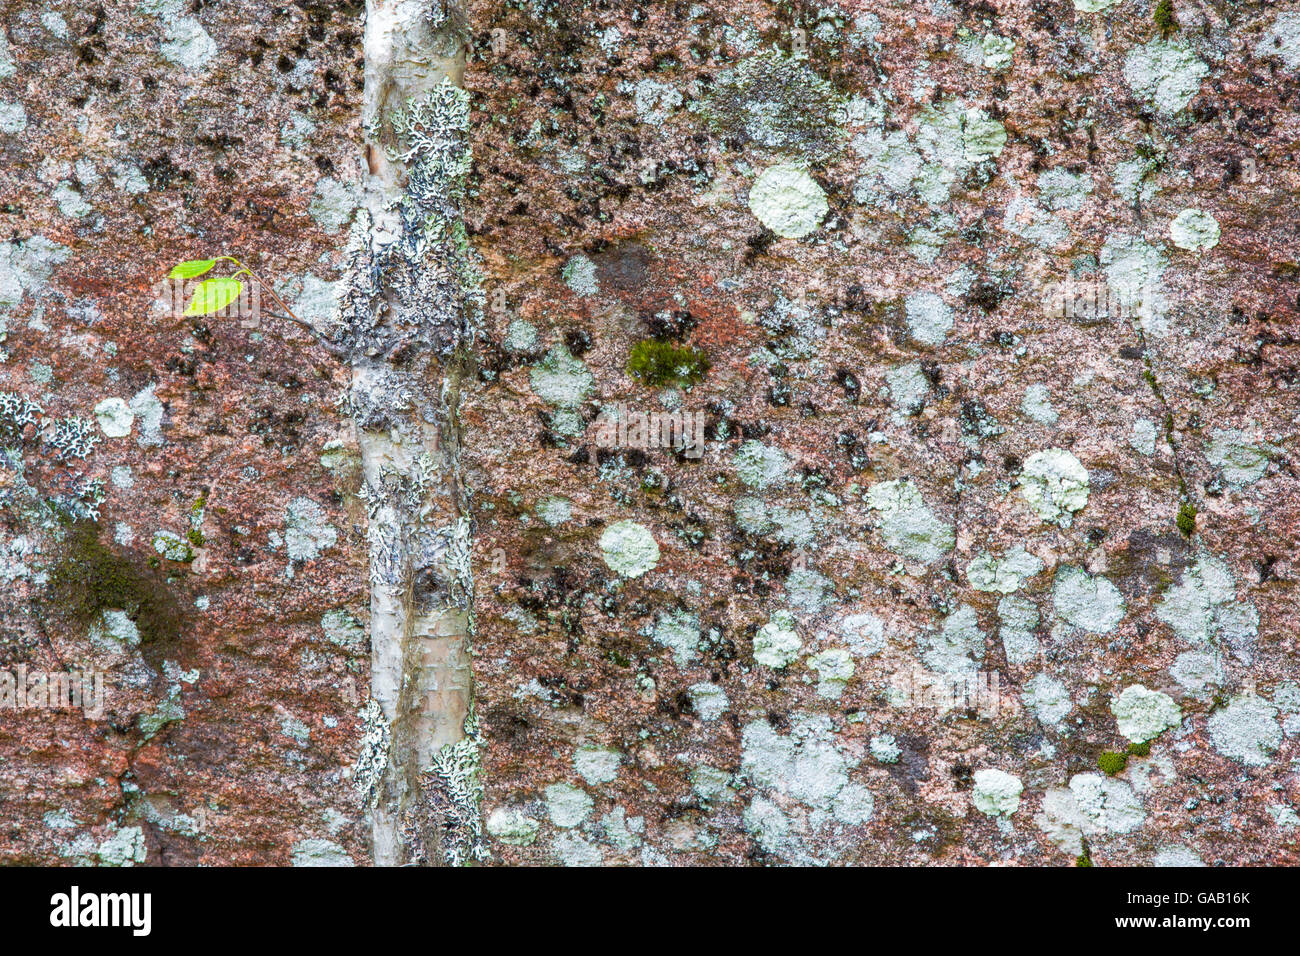 Birch tree (Betula pendula) with lichen, camouflaged against lichen covered rock face,  Muddus National Park, Sweden.  September Stock Photo